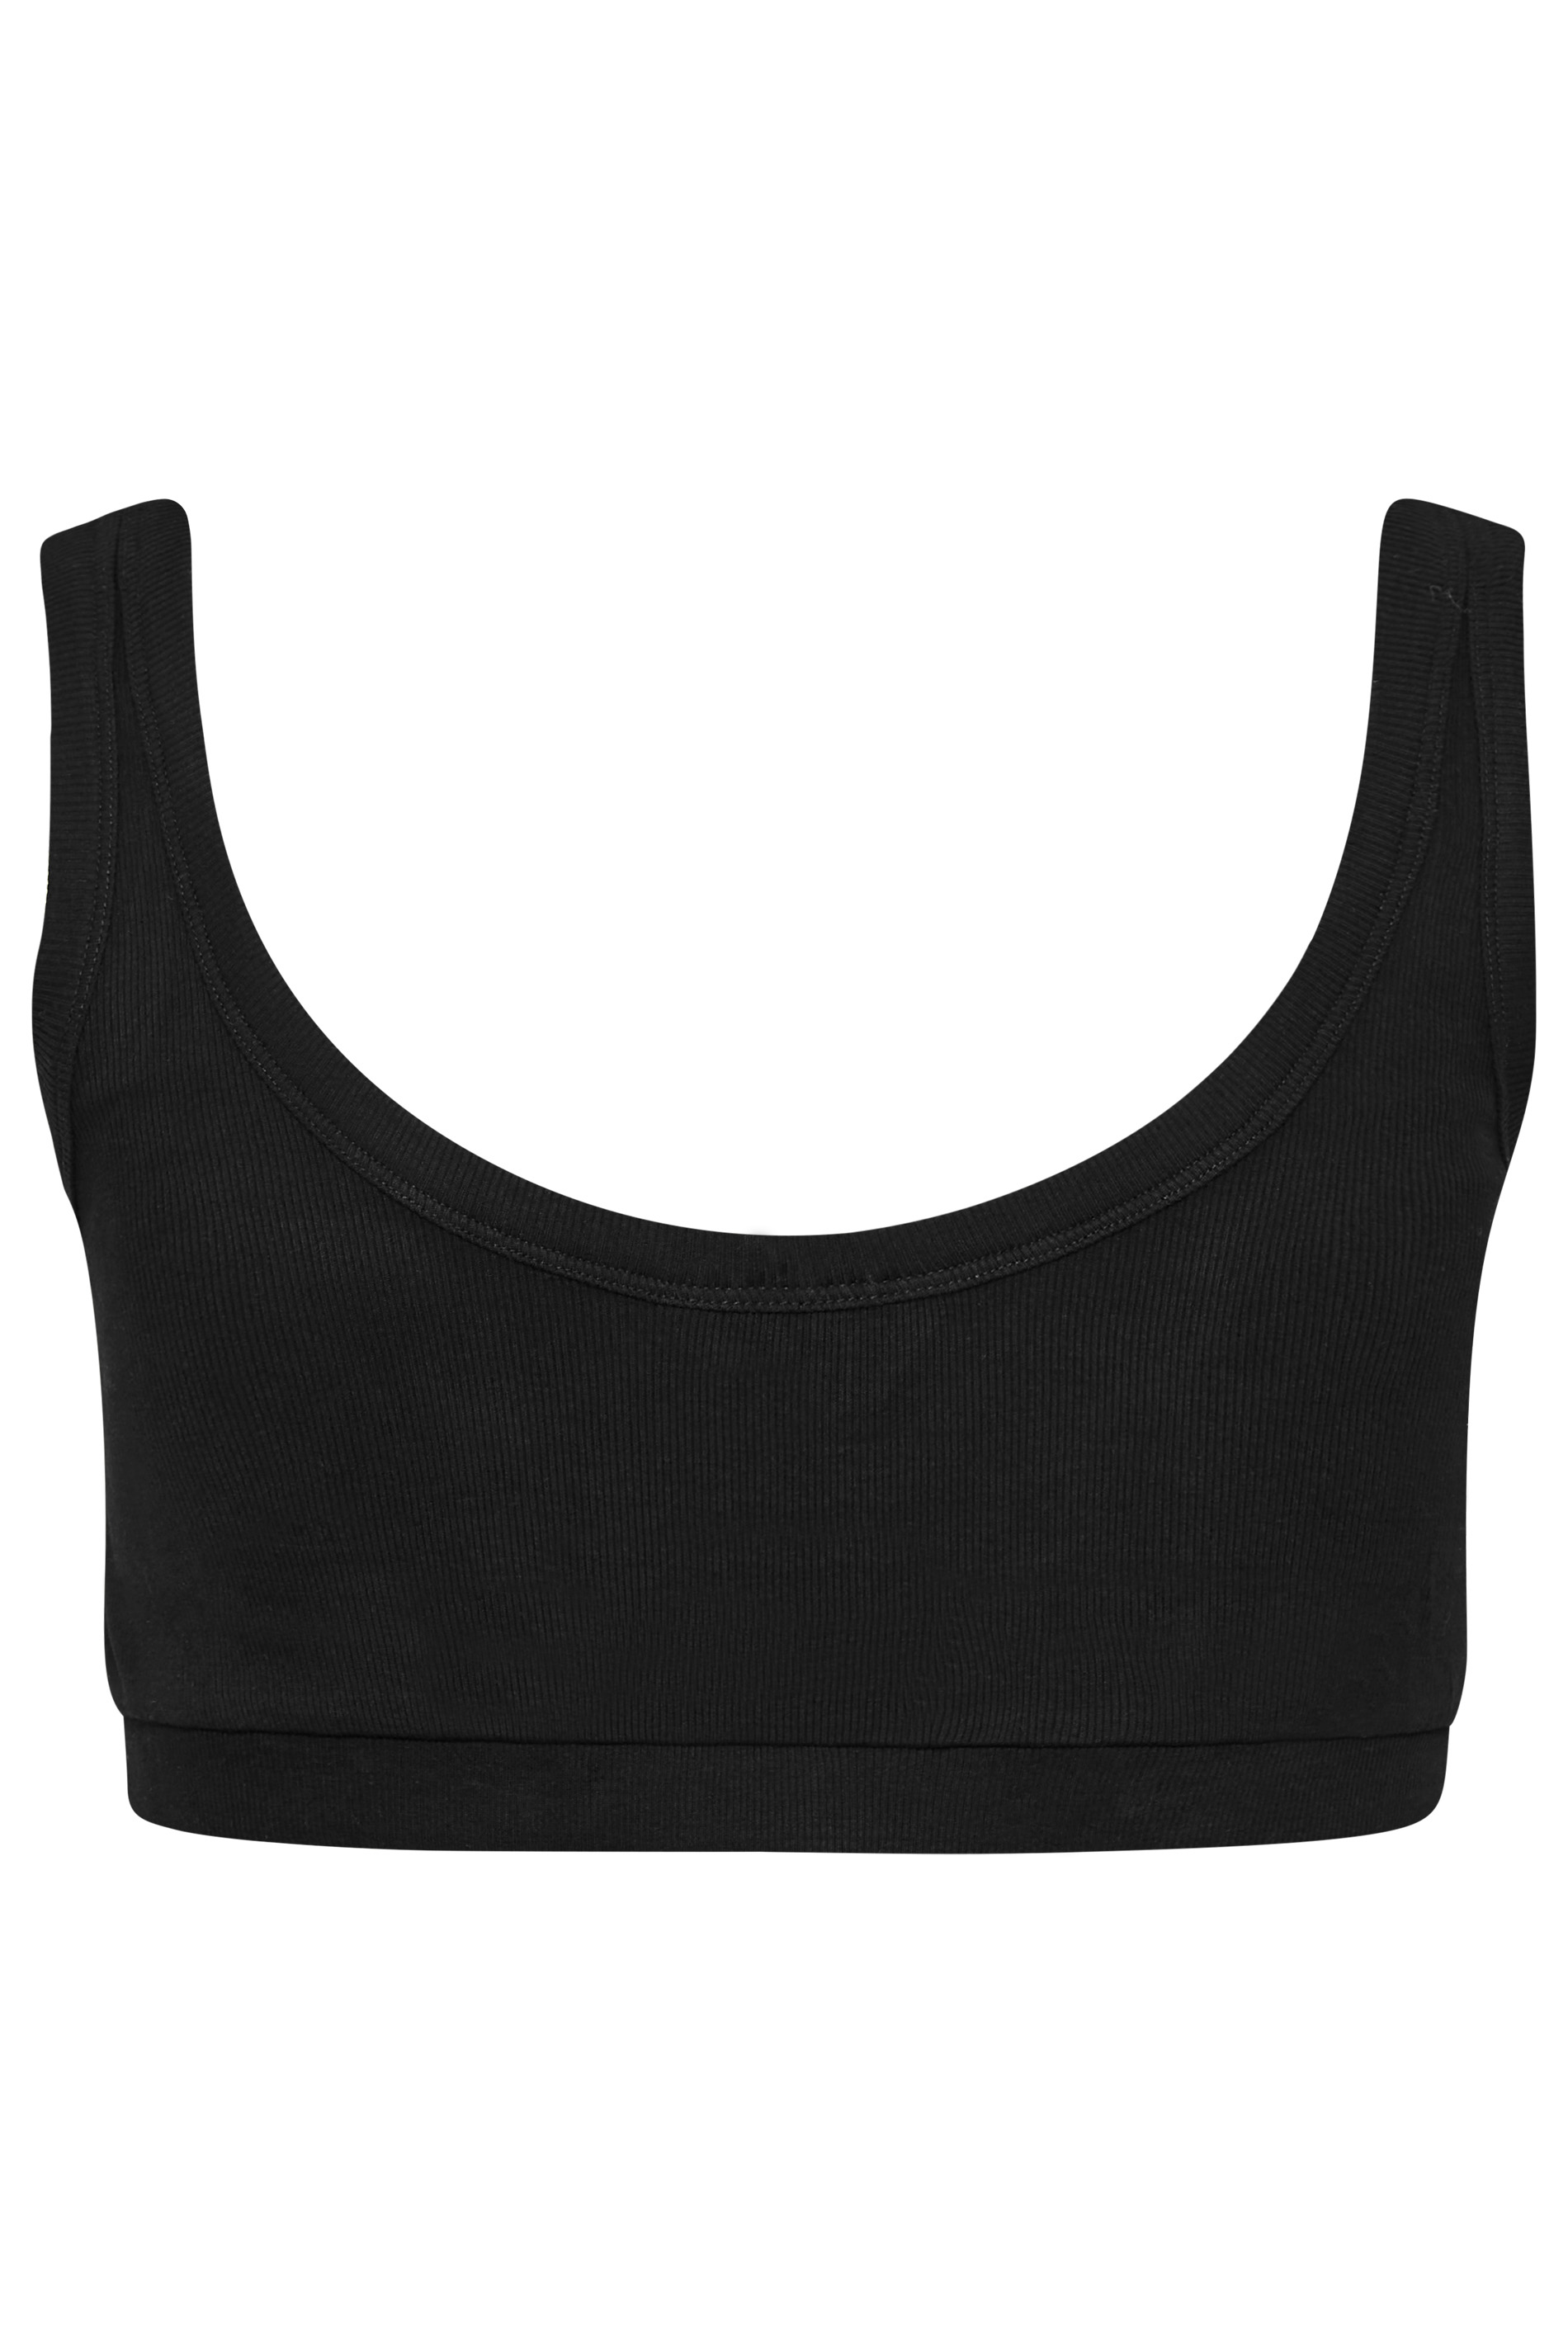 Fashion Mesh Lace Women Crop Top Tank Top Push Up Bra Sexy V Neck Camisole  Plus Size Tank Top (Color : C, Size : X-Large) : : Clothing, Shoes  & Accessories